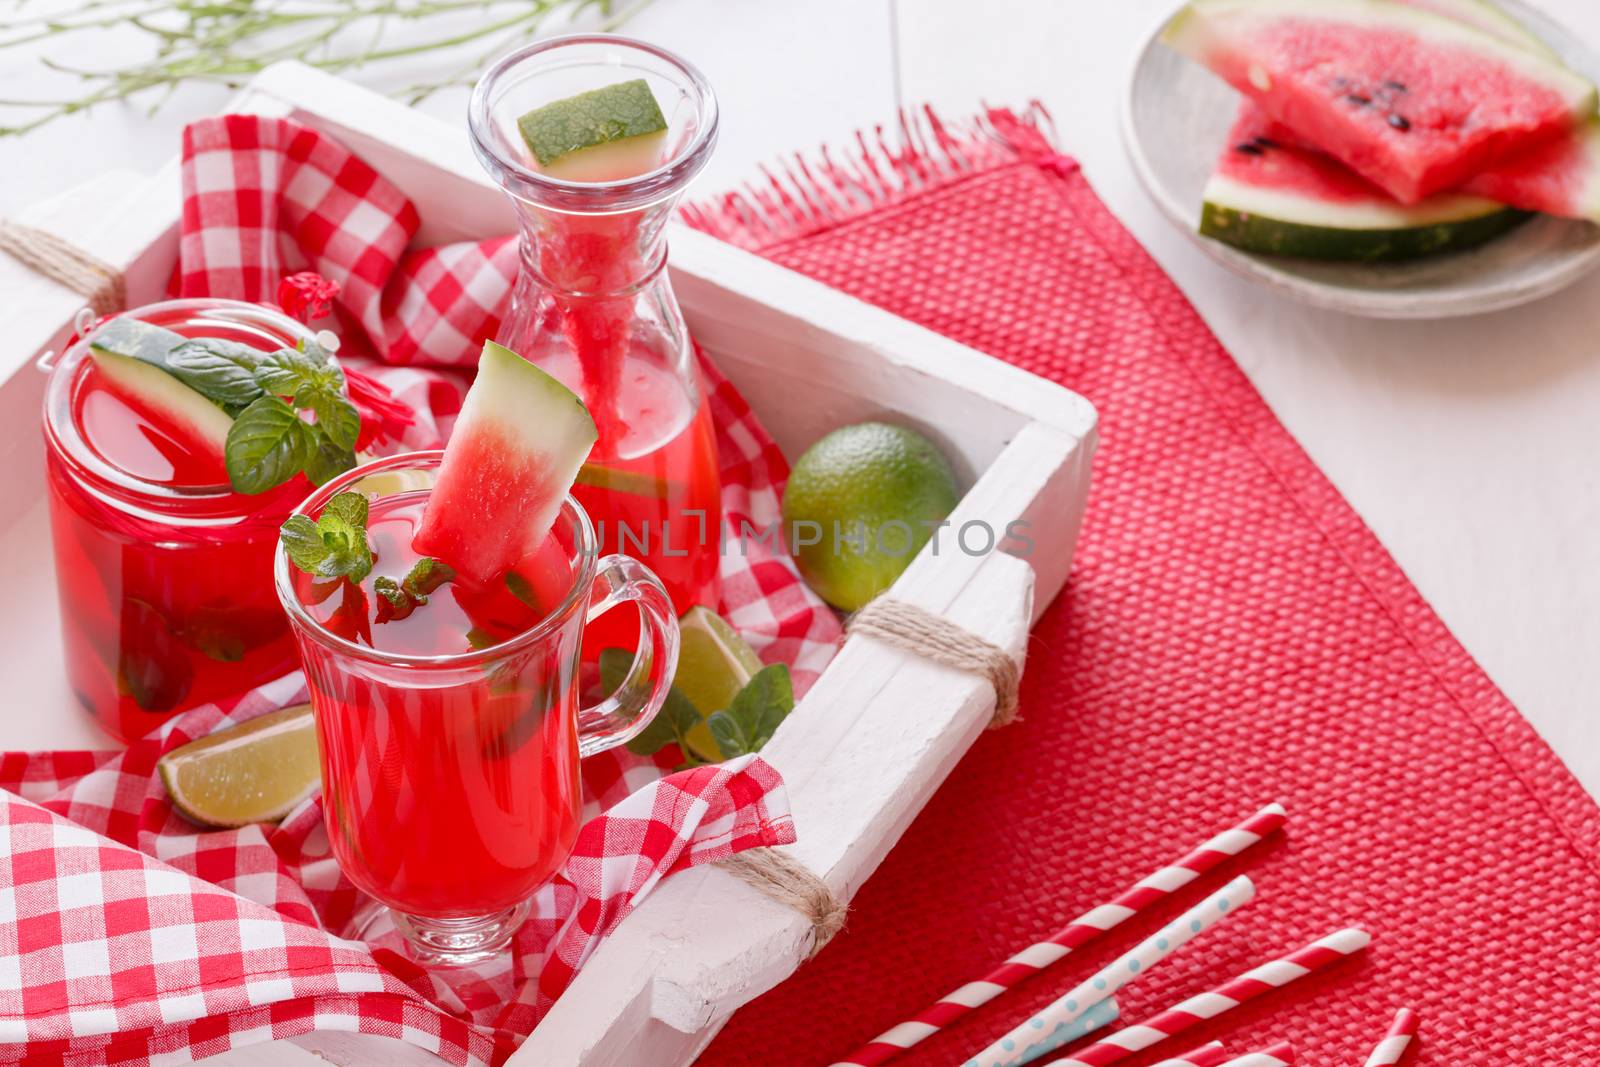 Watermelon cocktails. by Slast20